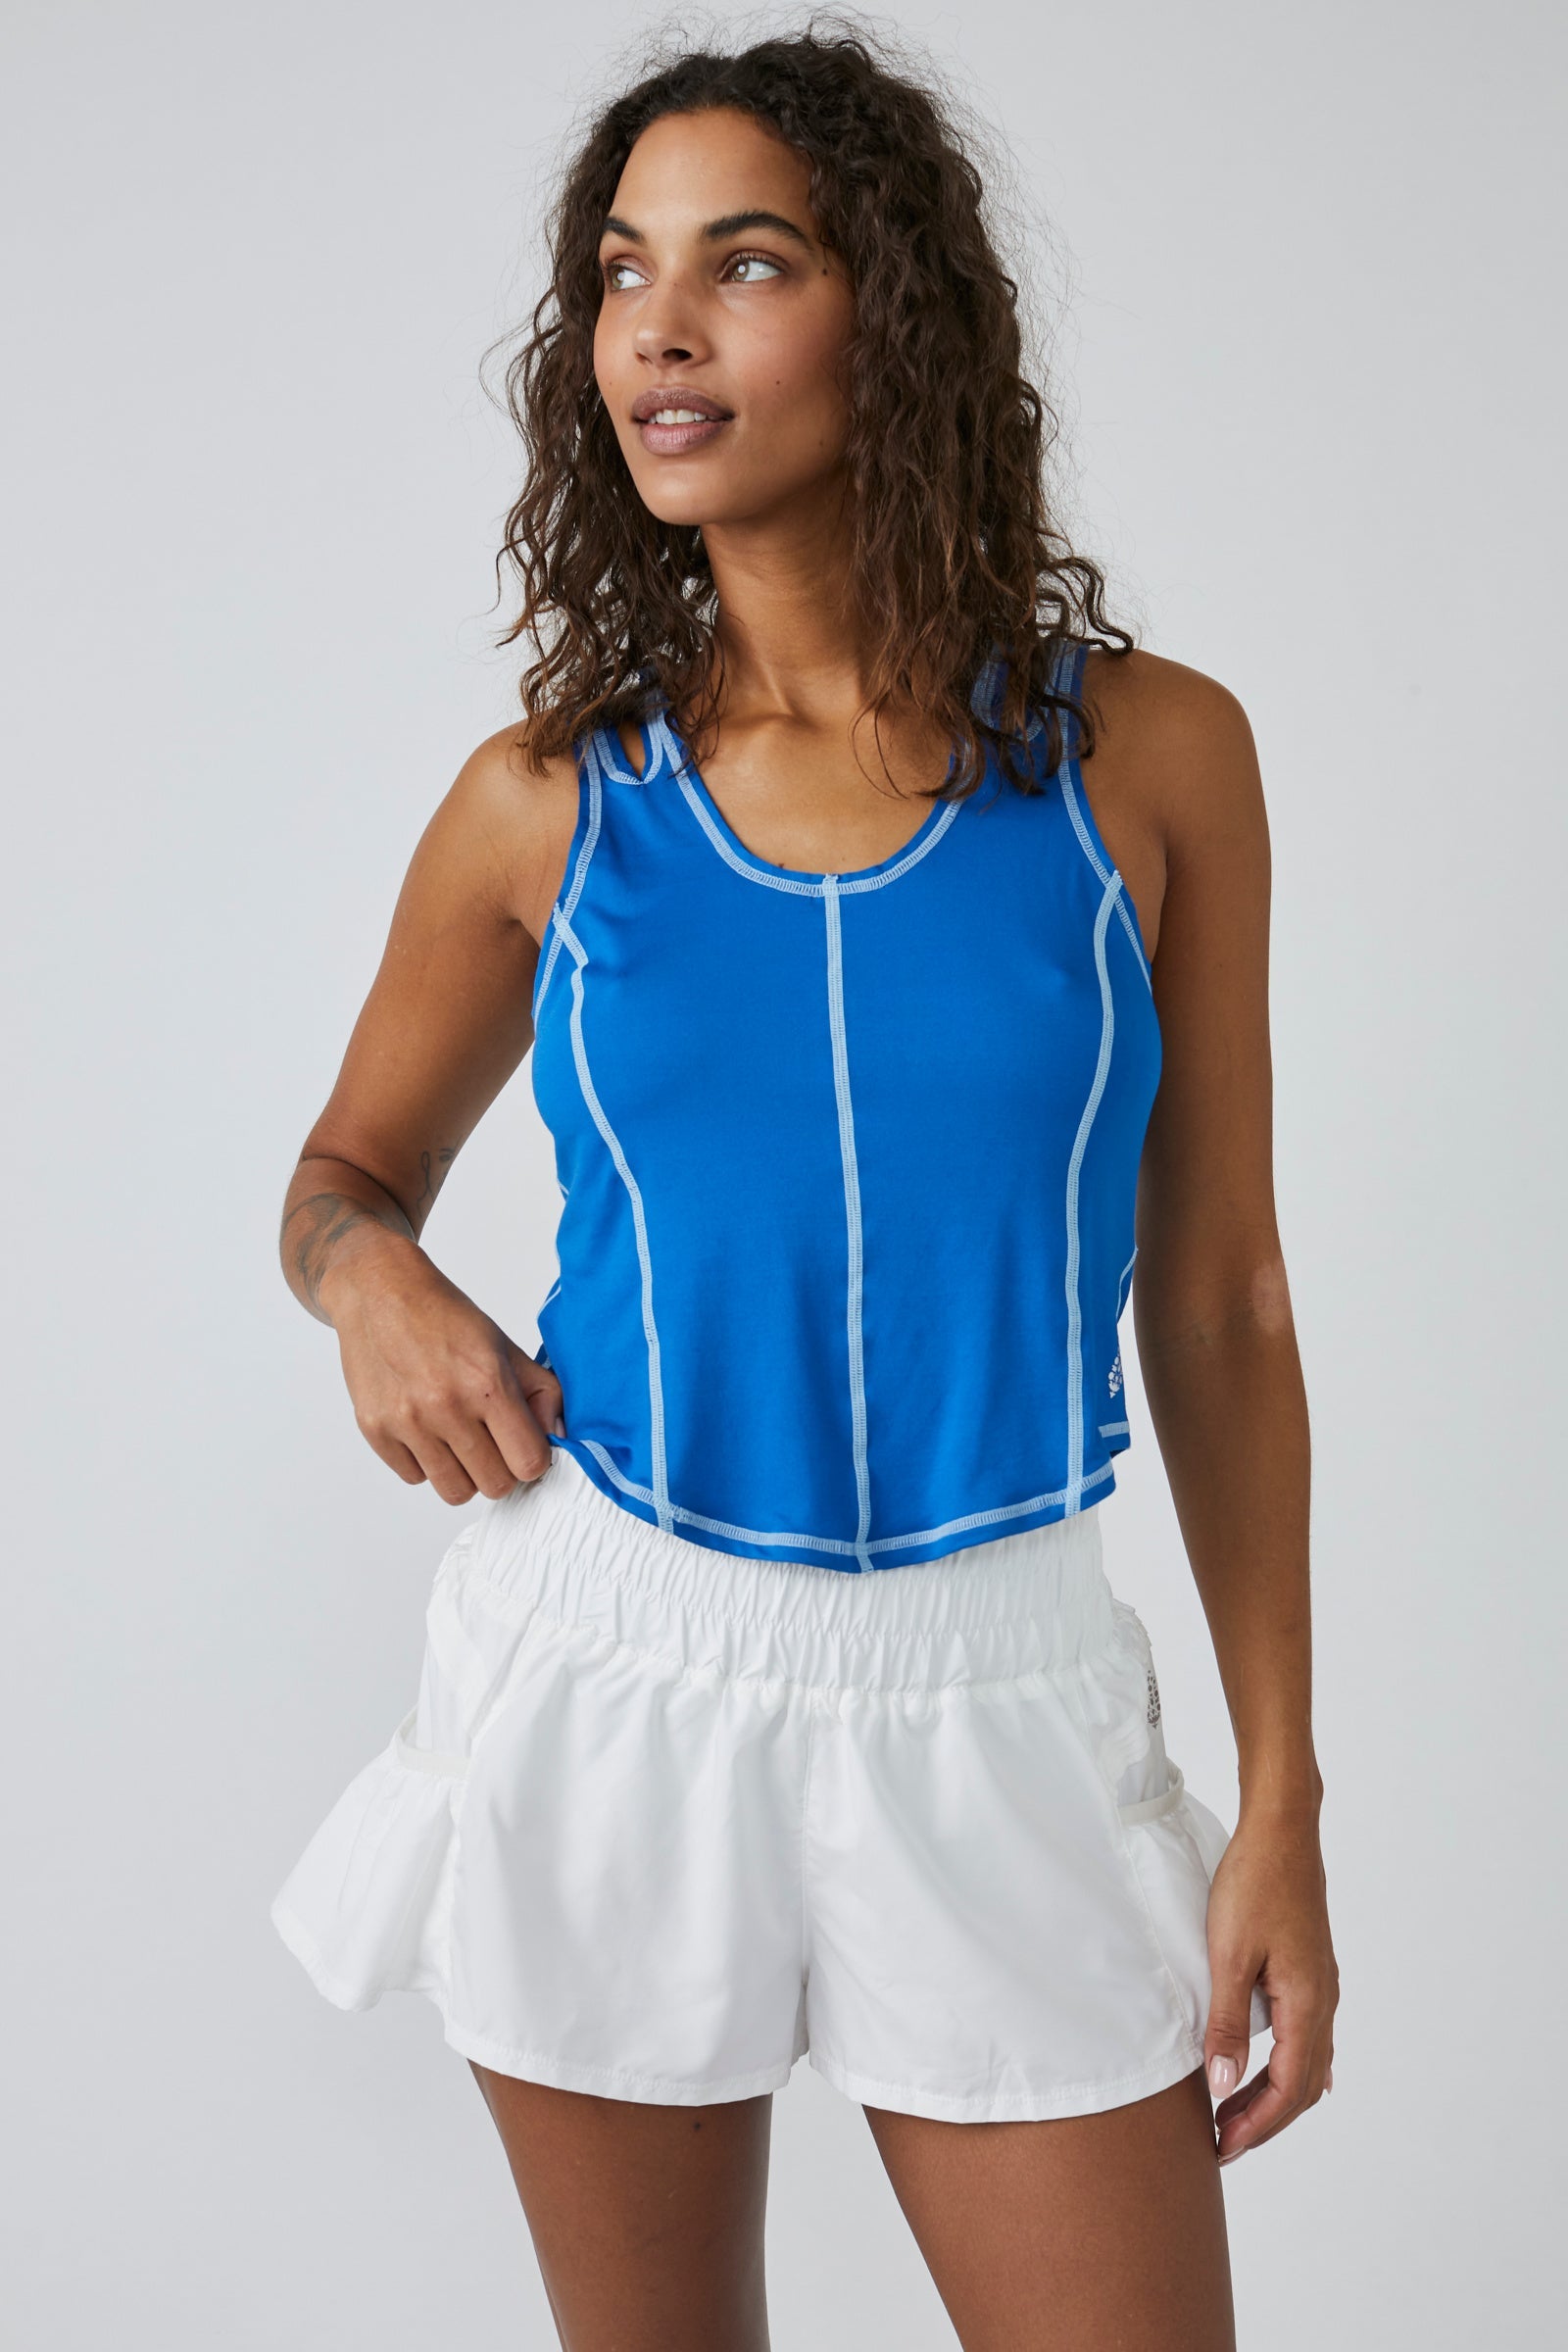 Get Your Flirt On Shorts  Workout attire, Free people activewear